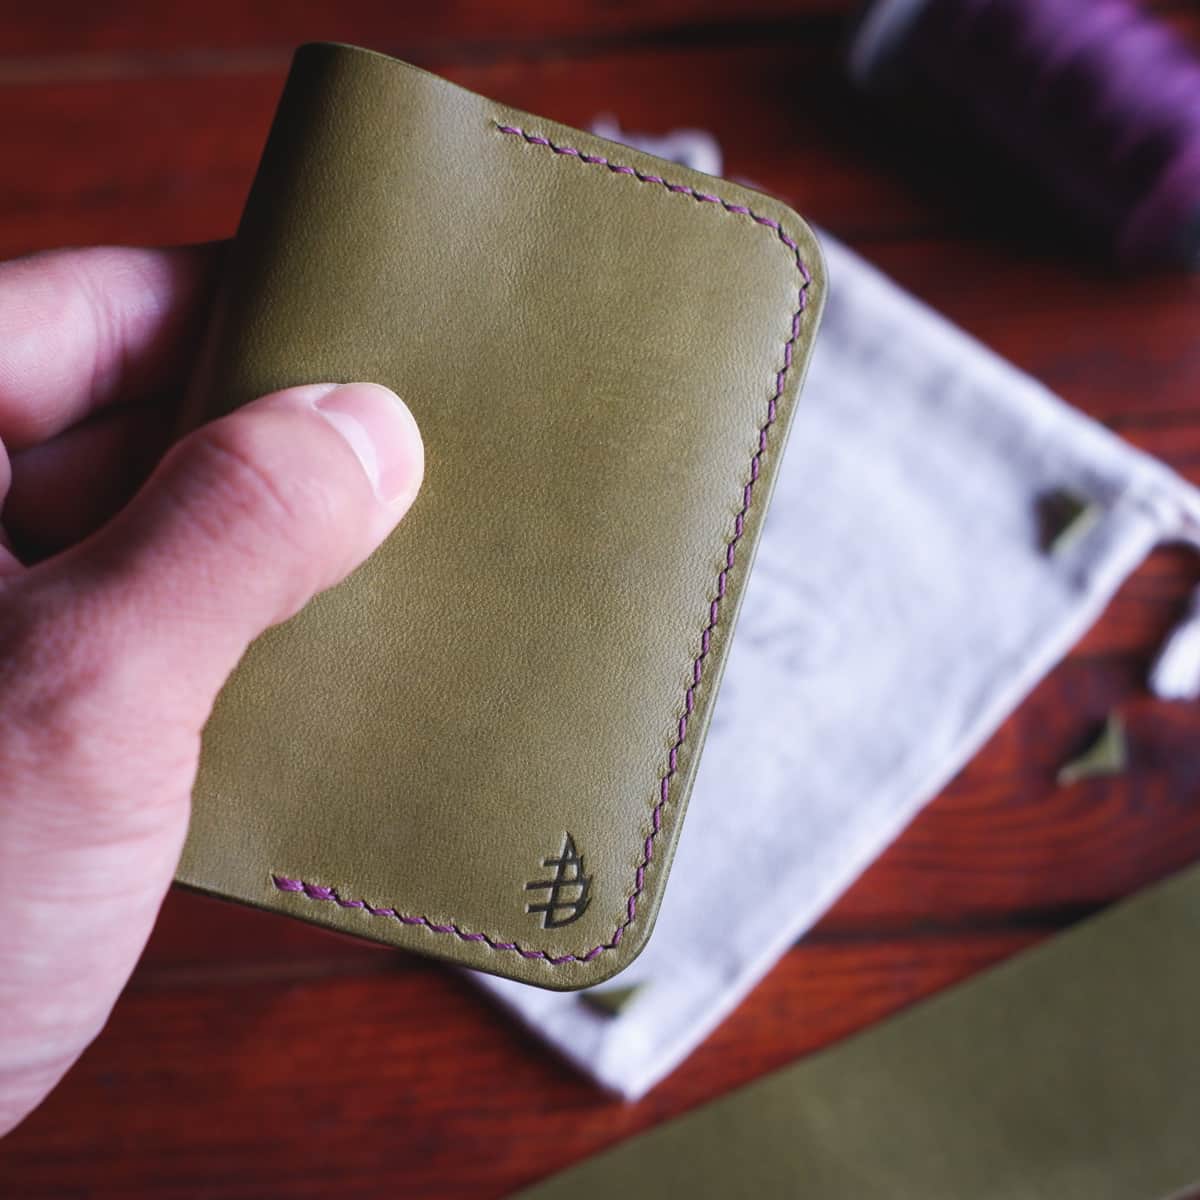 Exterior of The Mountain Slim Bifold in Ponte Wax vegetable tanned leather